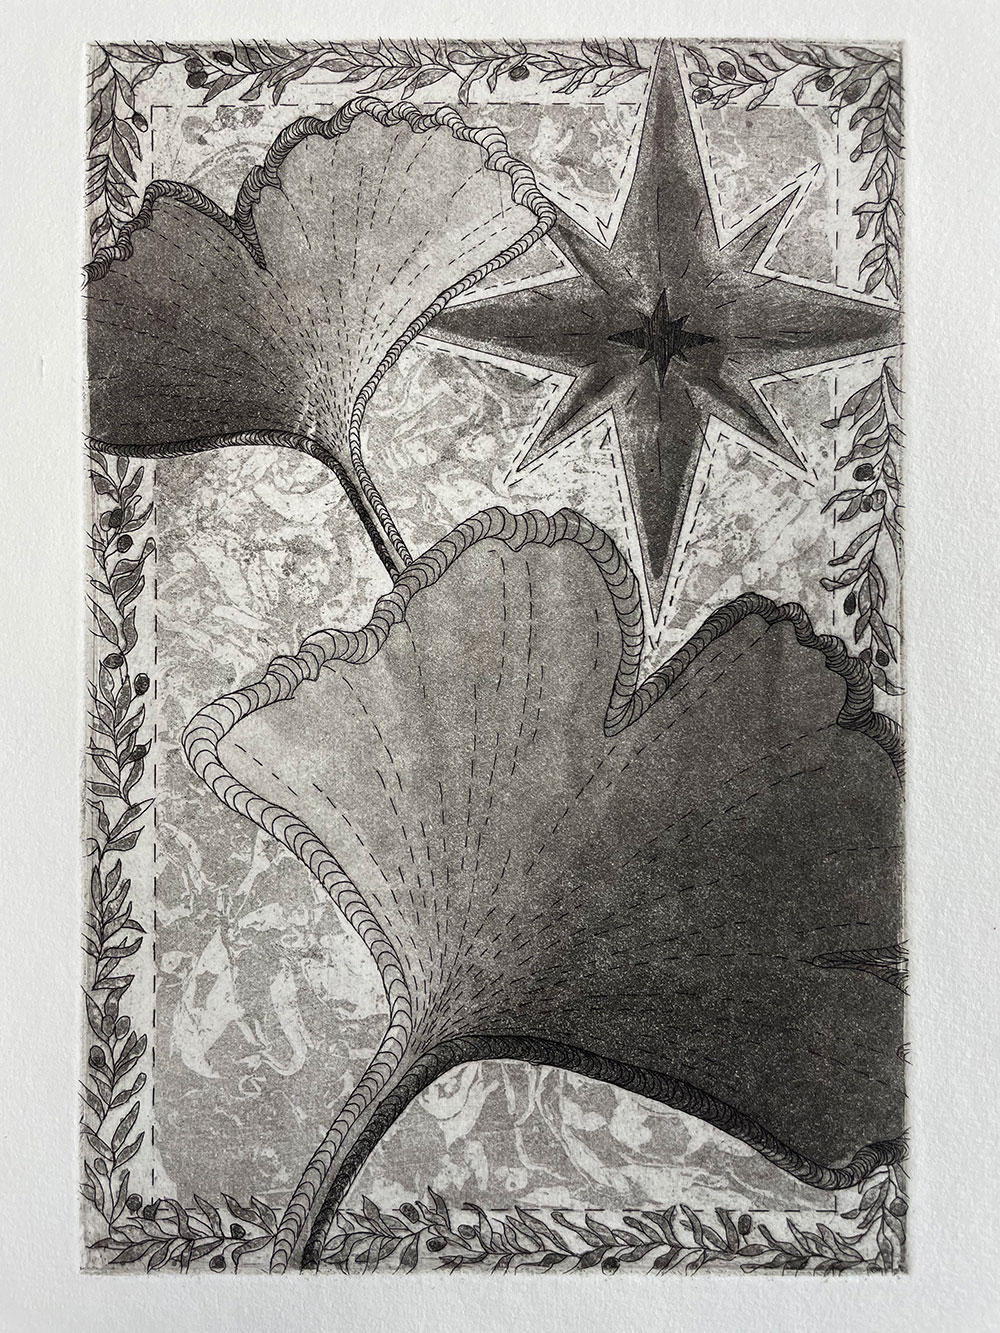 A printed image of two large leaves surrounded by a pattern of leaves and one large diamond. 